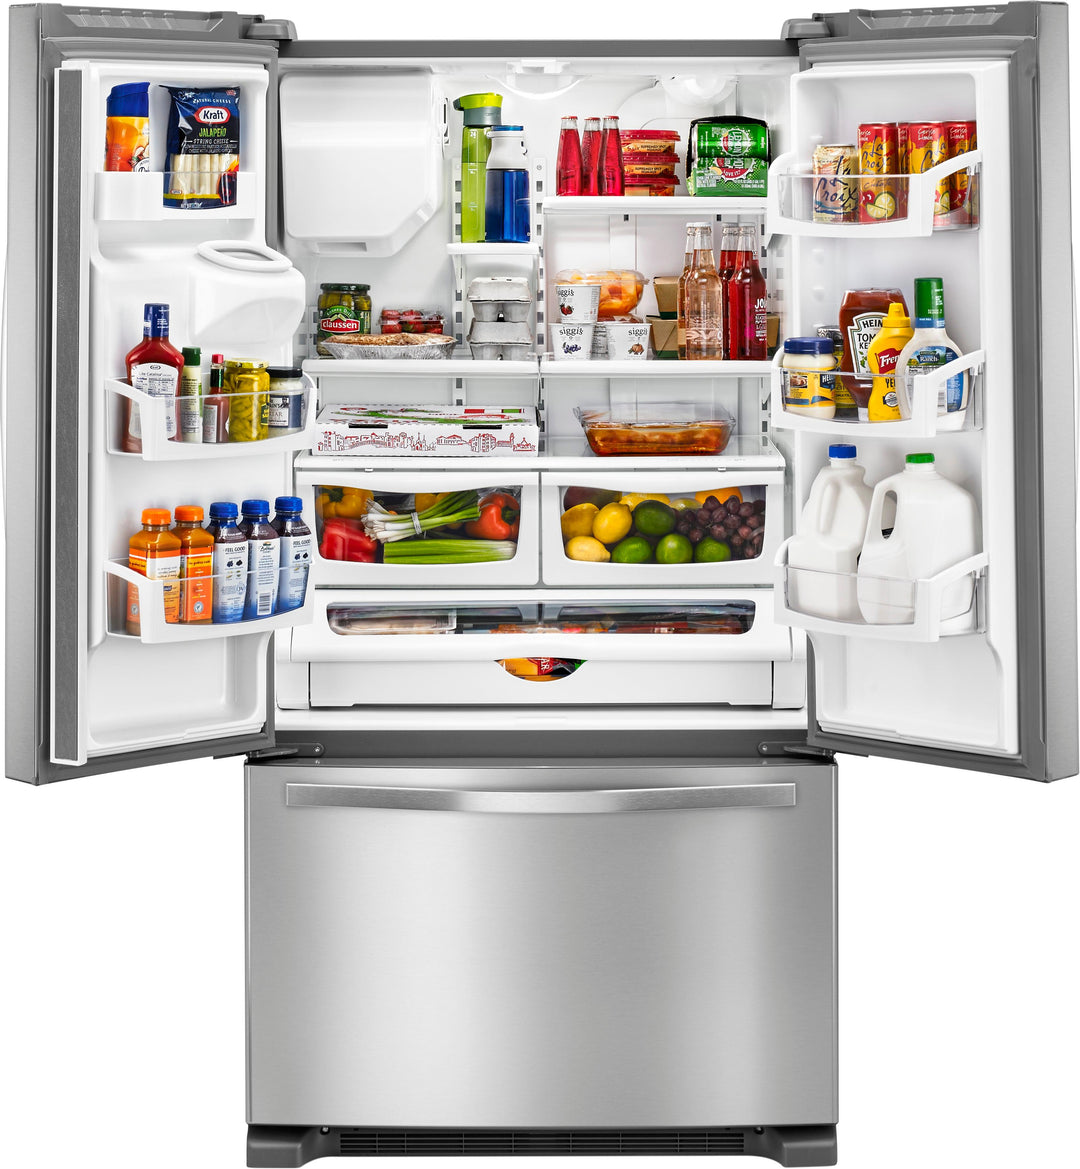 Whirlpool - 24.7 Cu. Ft. French Door Refrigerator - Stainless steel_5